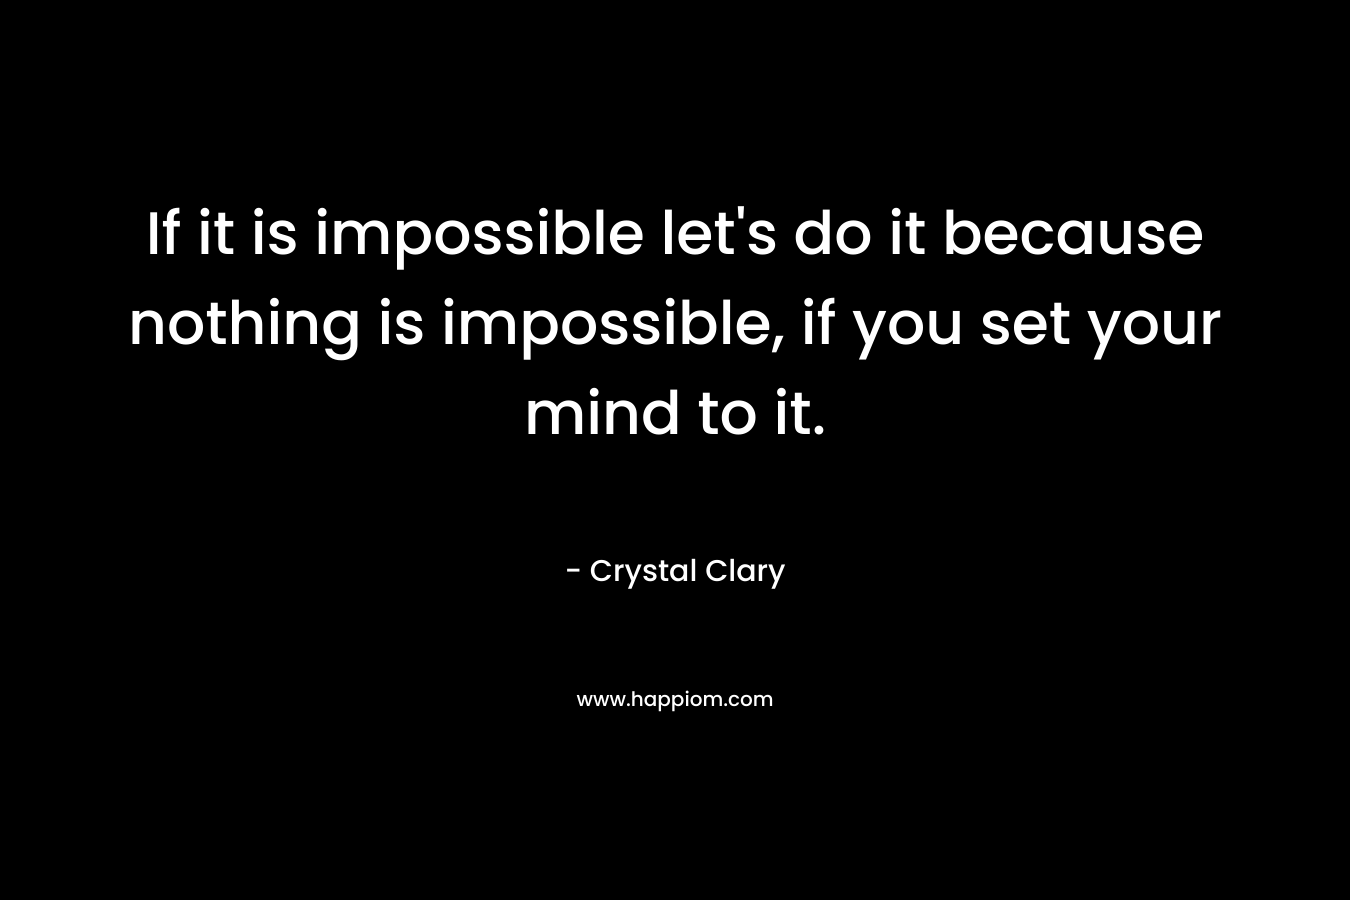 If it is impossible let's do it because nothing is impossible, if you set your mind to it.